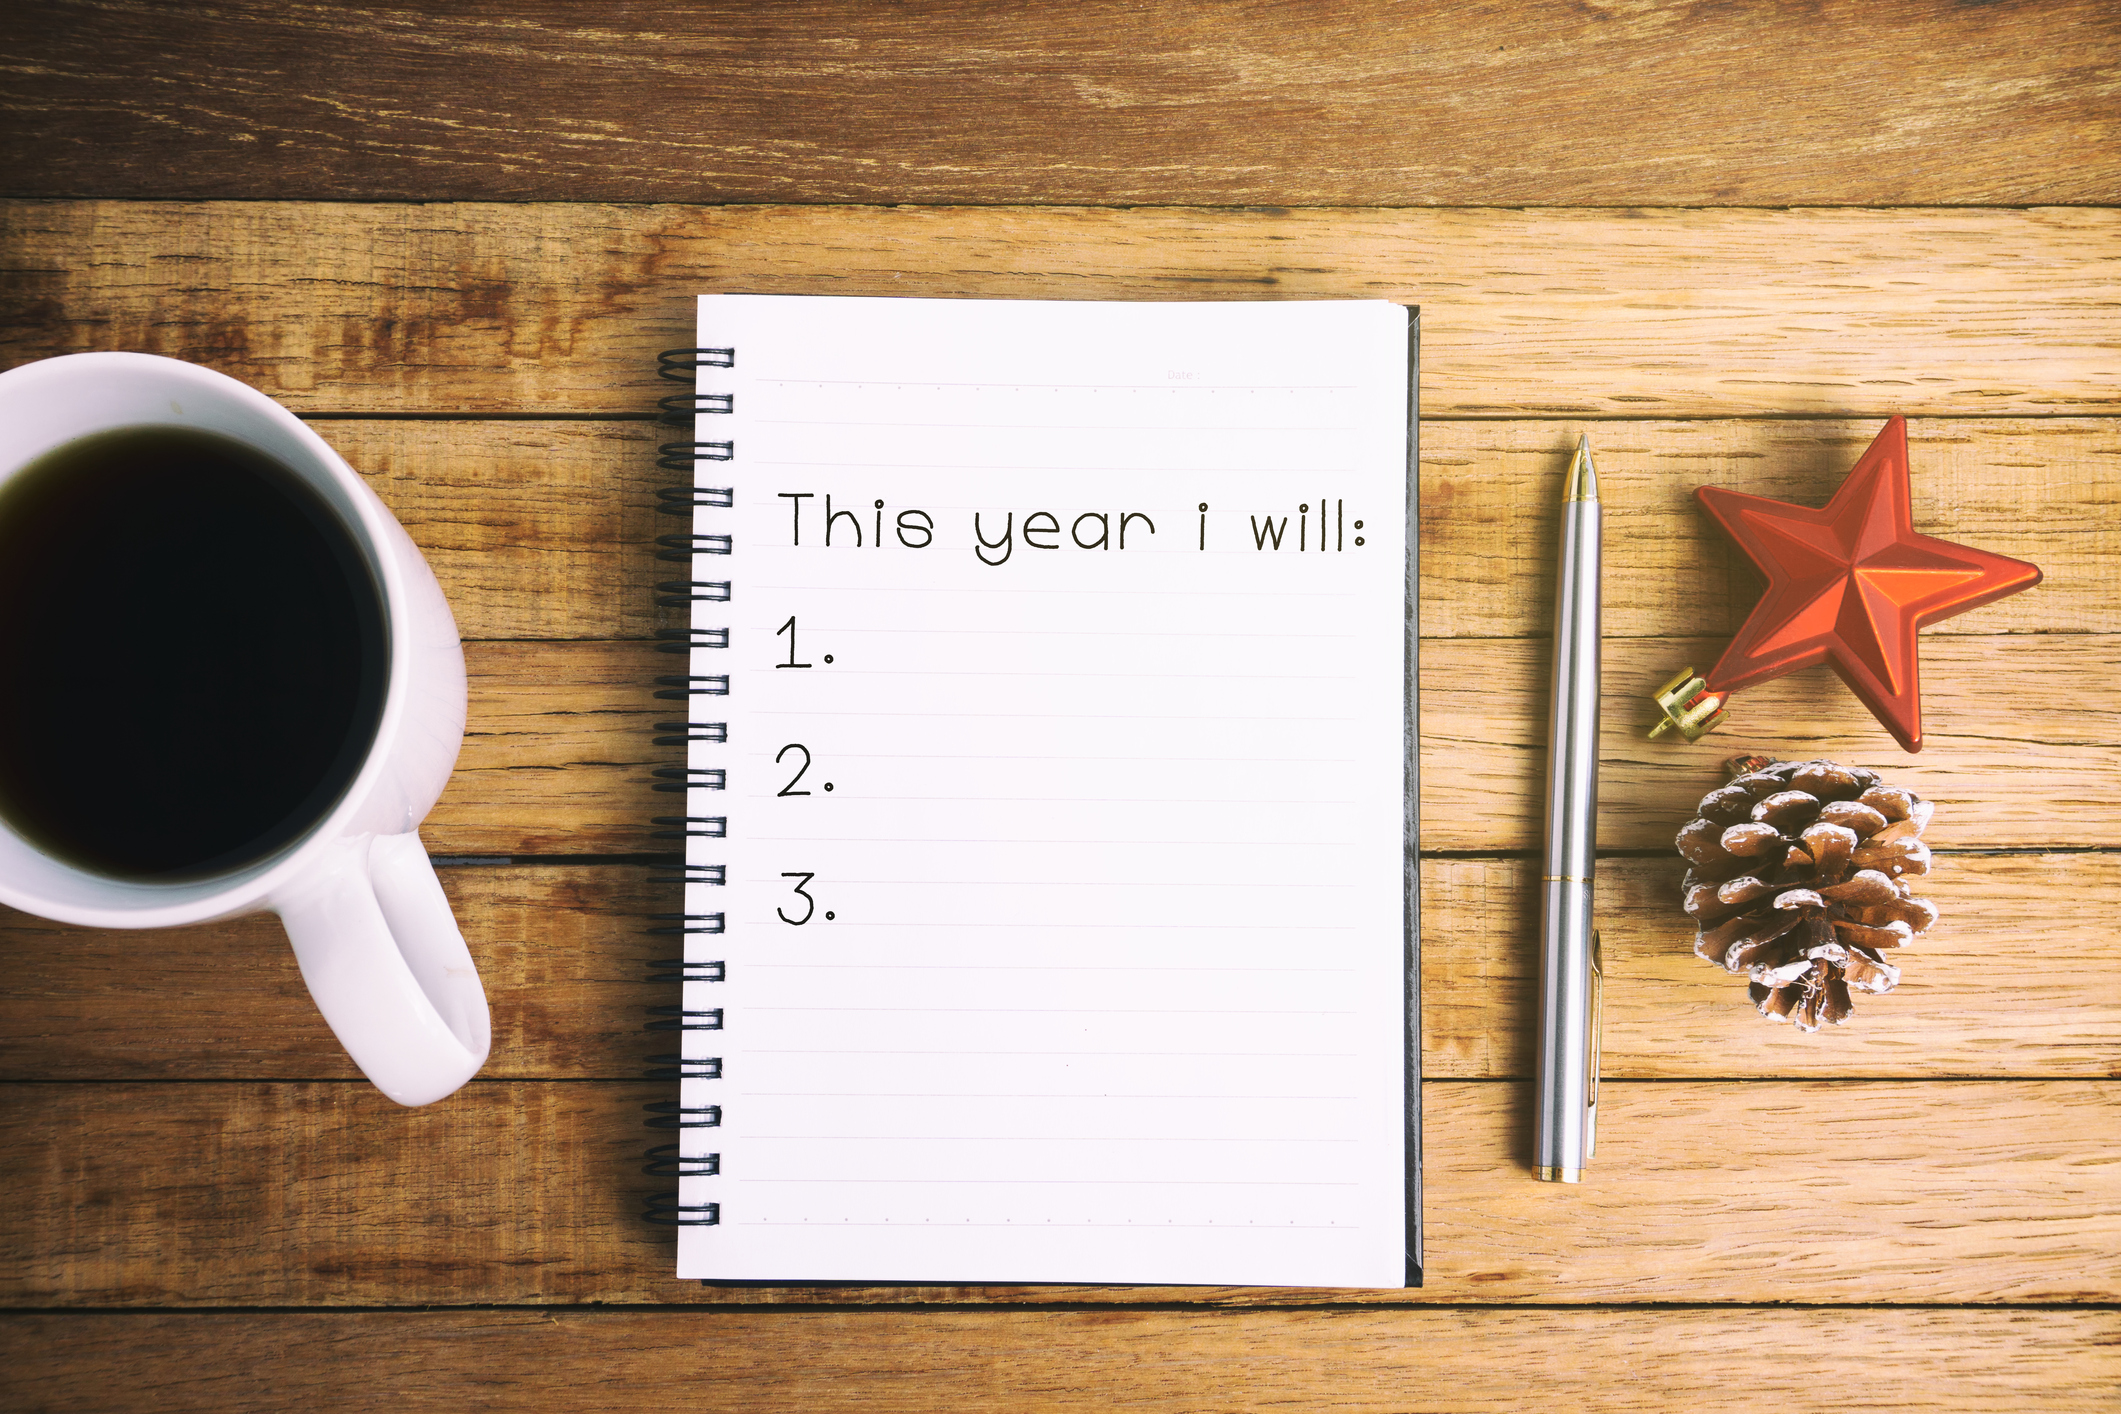 Affiliate Programs For New Year's Resolutions